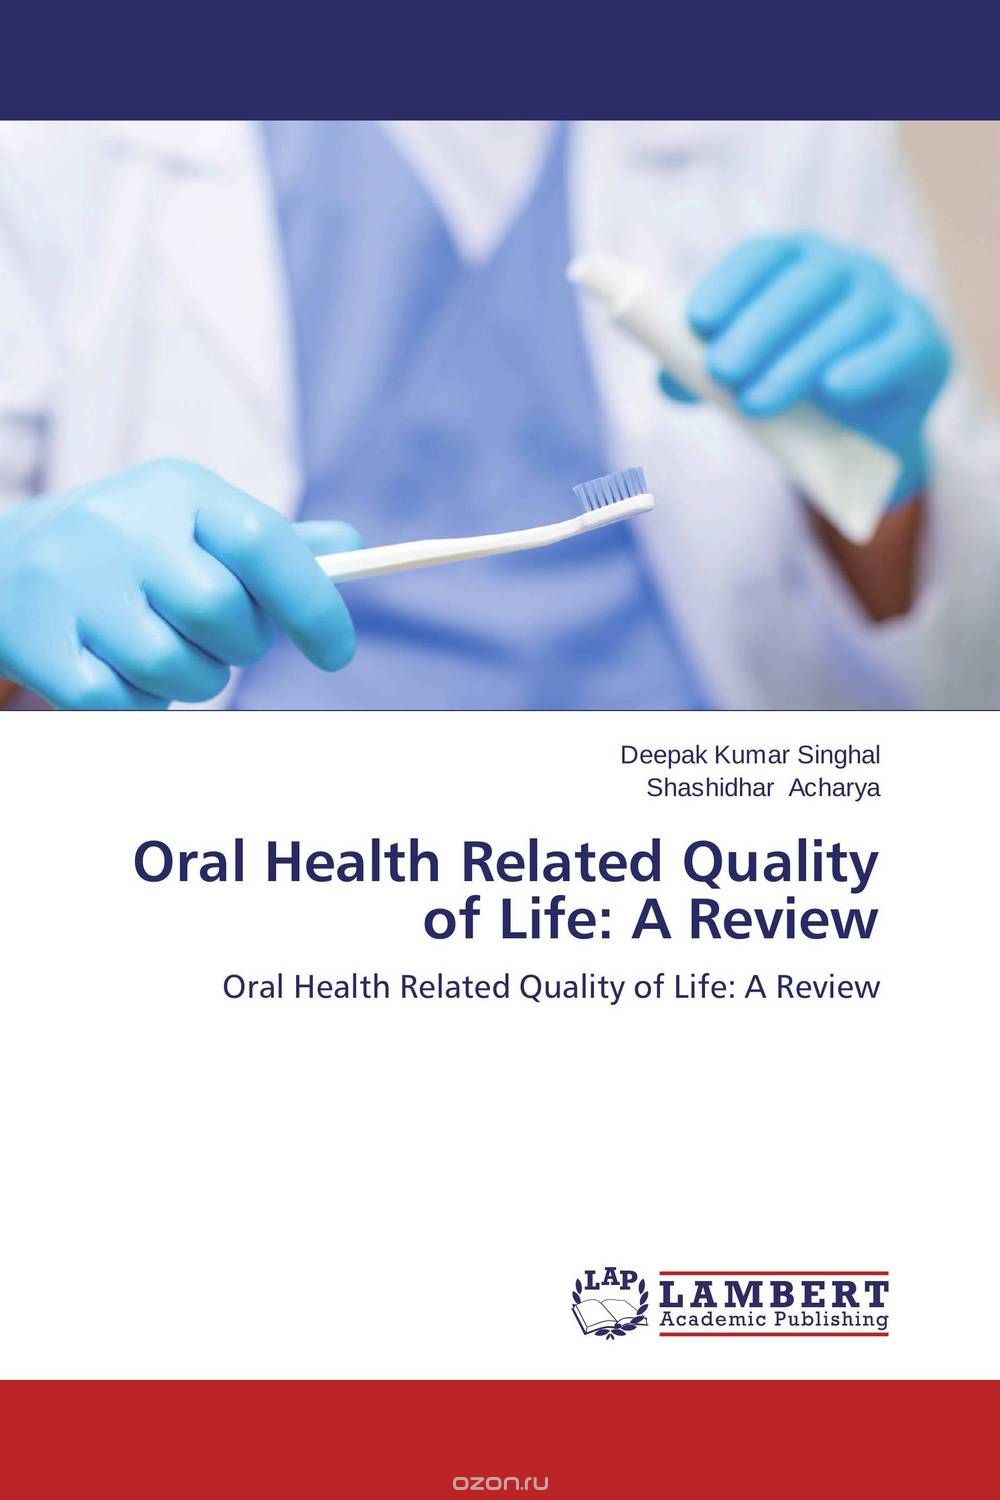 Скачать книгу "Oral Health Related Quality of Life: A Review"